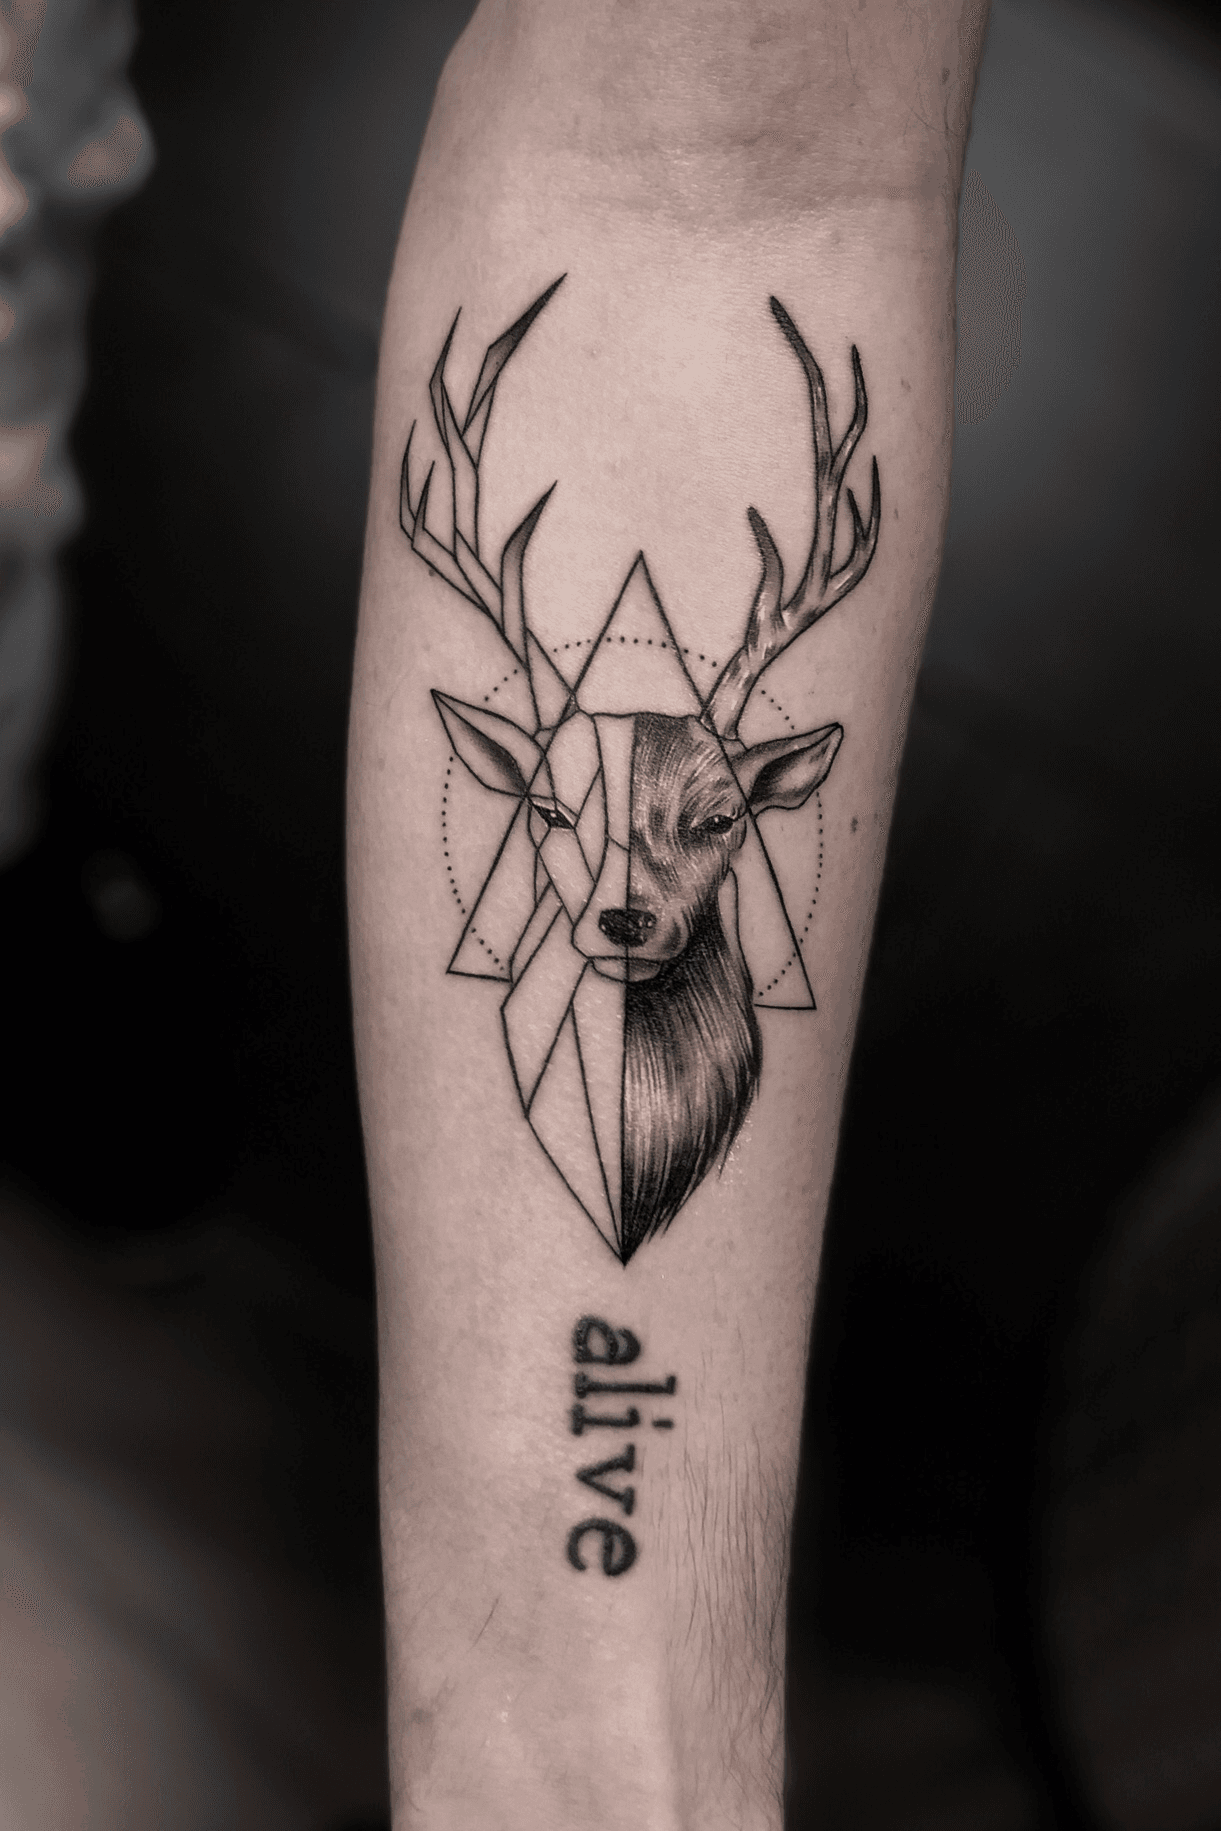 Being animal tattoos Sachin on Twitter Deer tattoo design If you are  looking for a symbol of gentleness anFor more info  visithttpstco0ioEkKGimU httpstcoiPcdpdsODn  Twitter